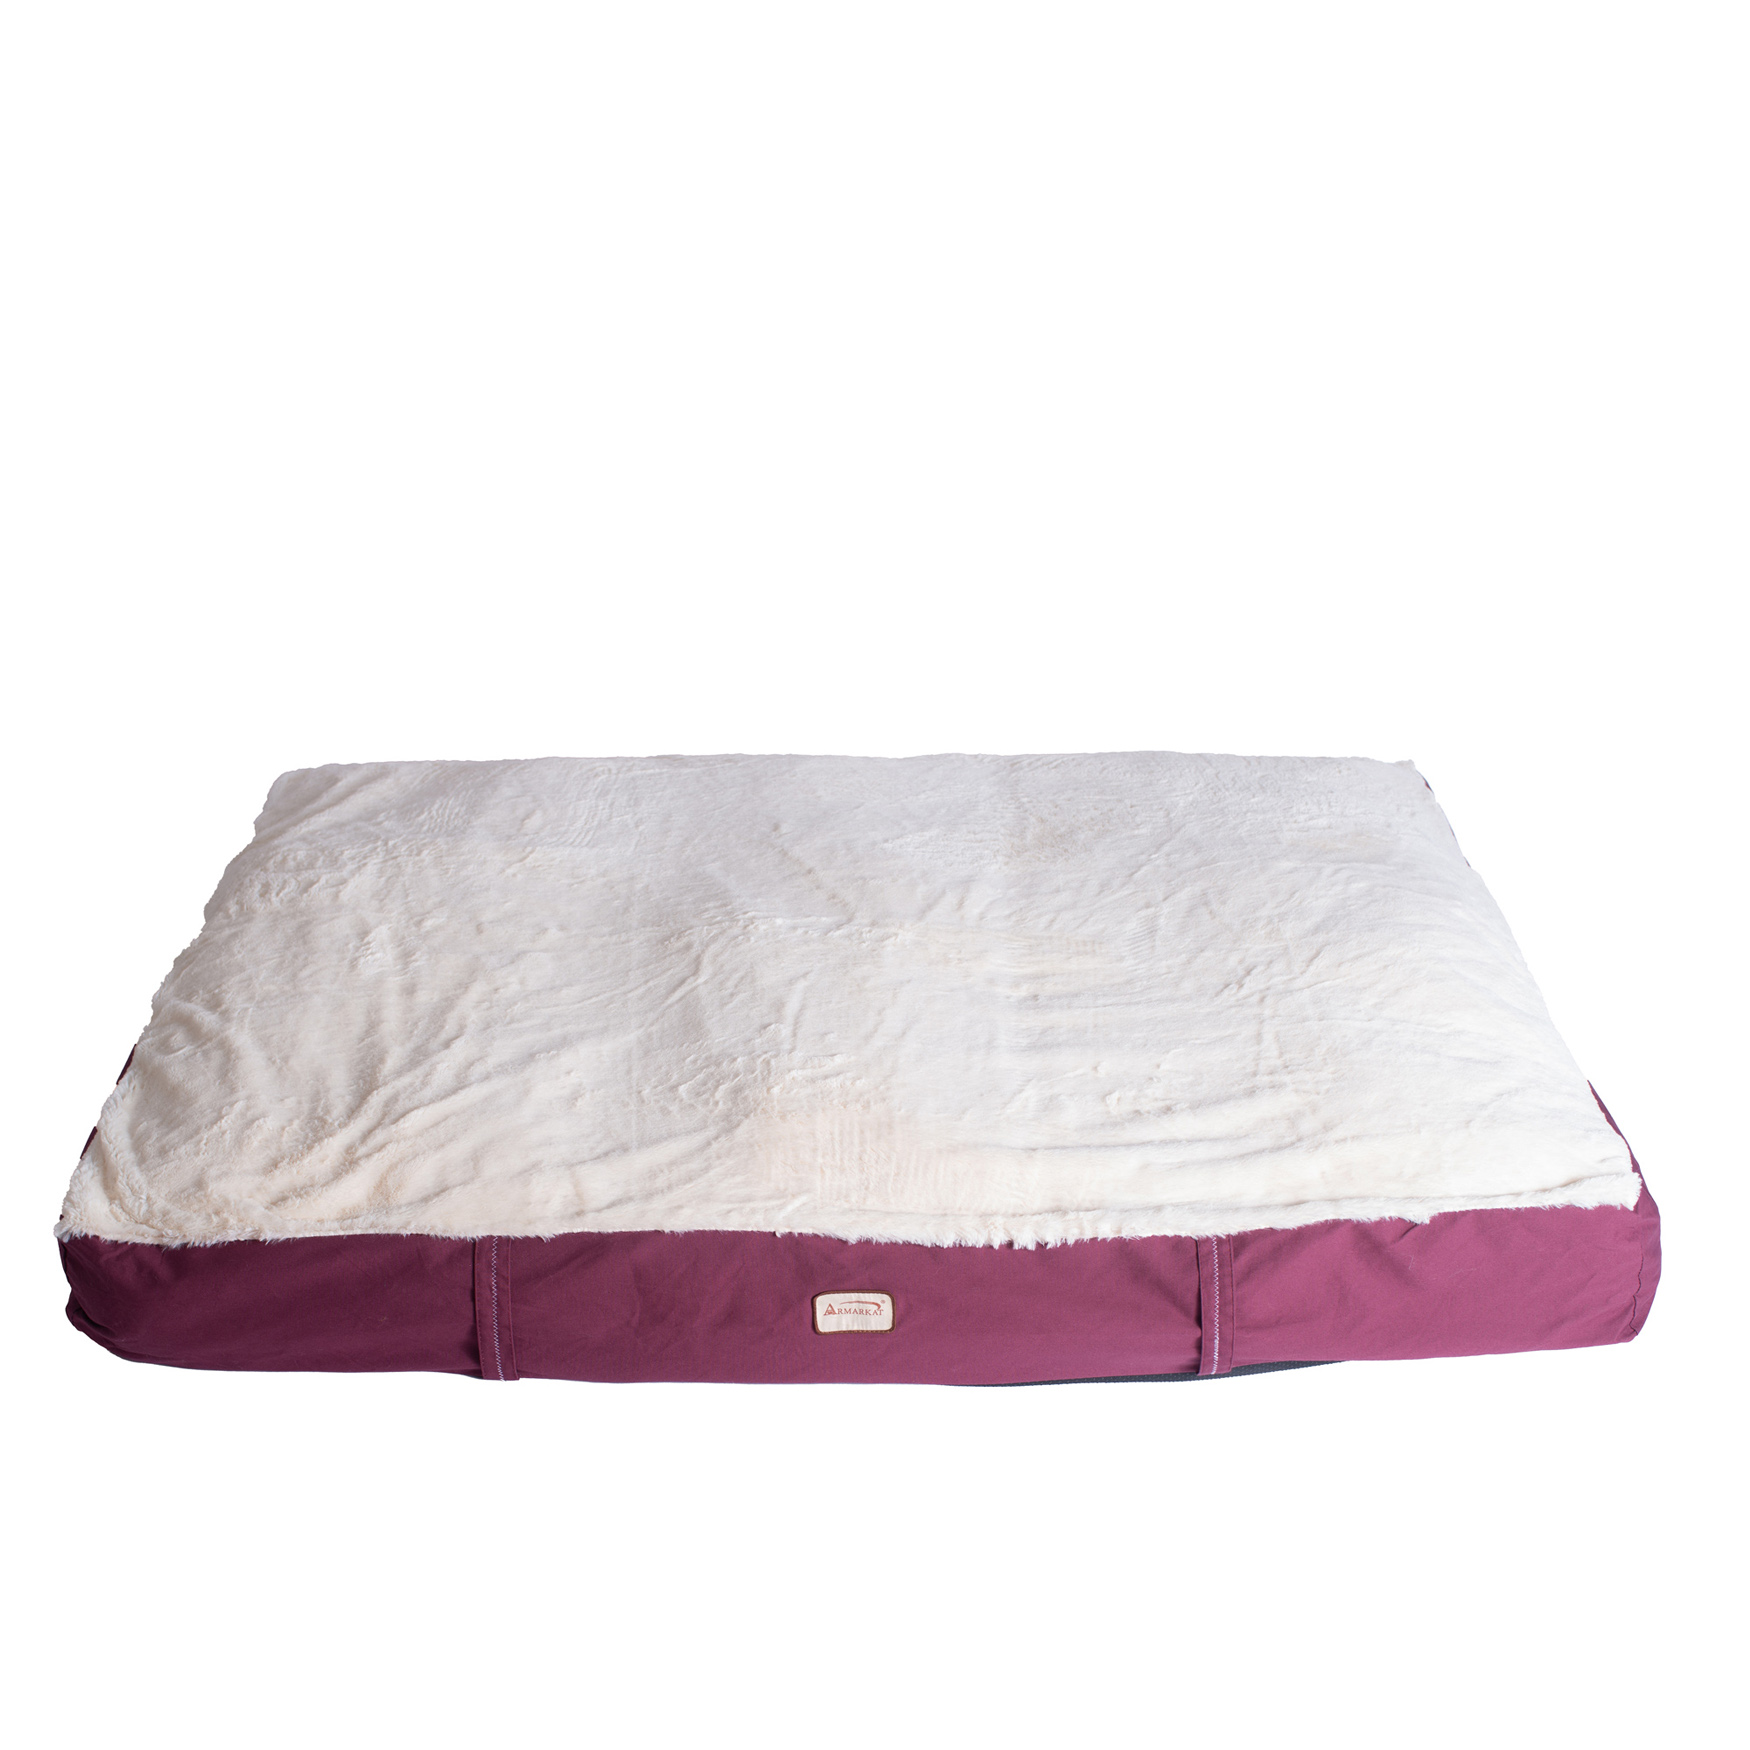 Extra Large Pet Dog Bed Mat With Poly Fill Cushion & Removel Cover, IVORY BURGUNDY